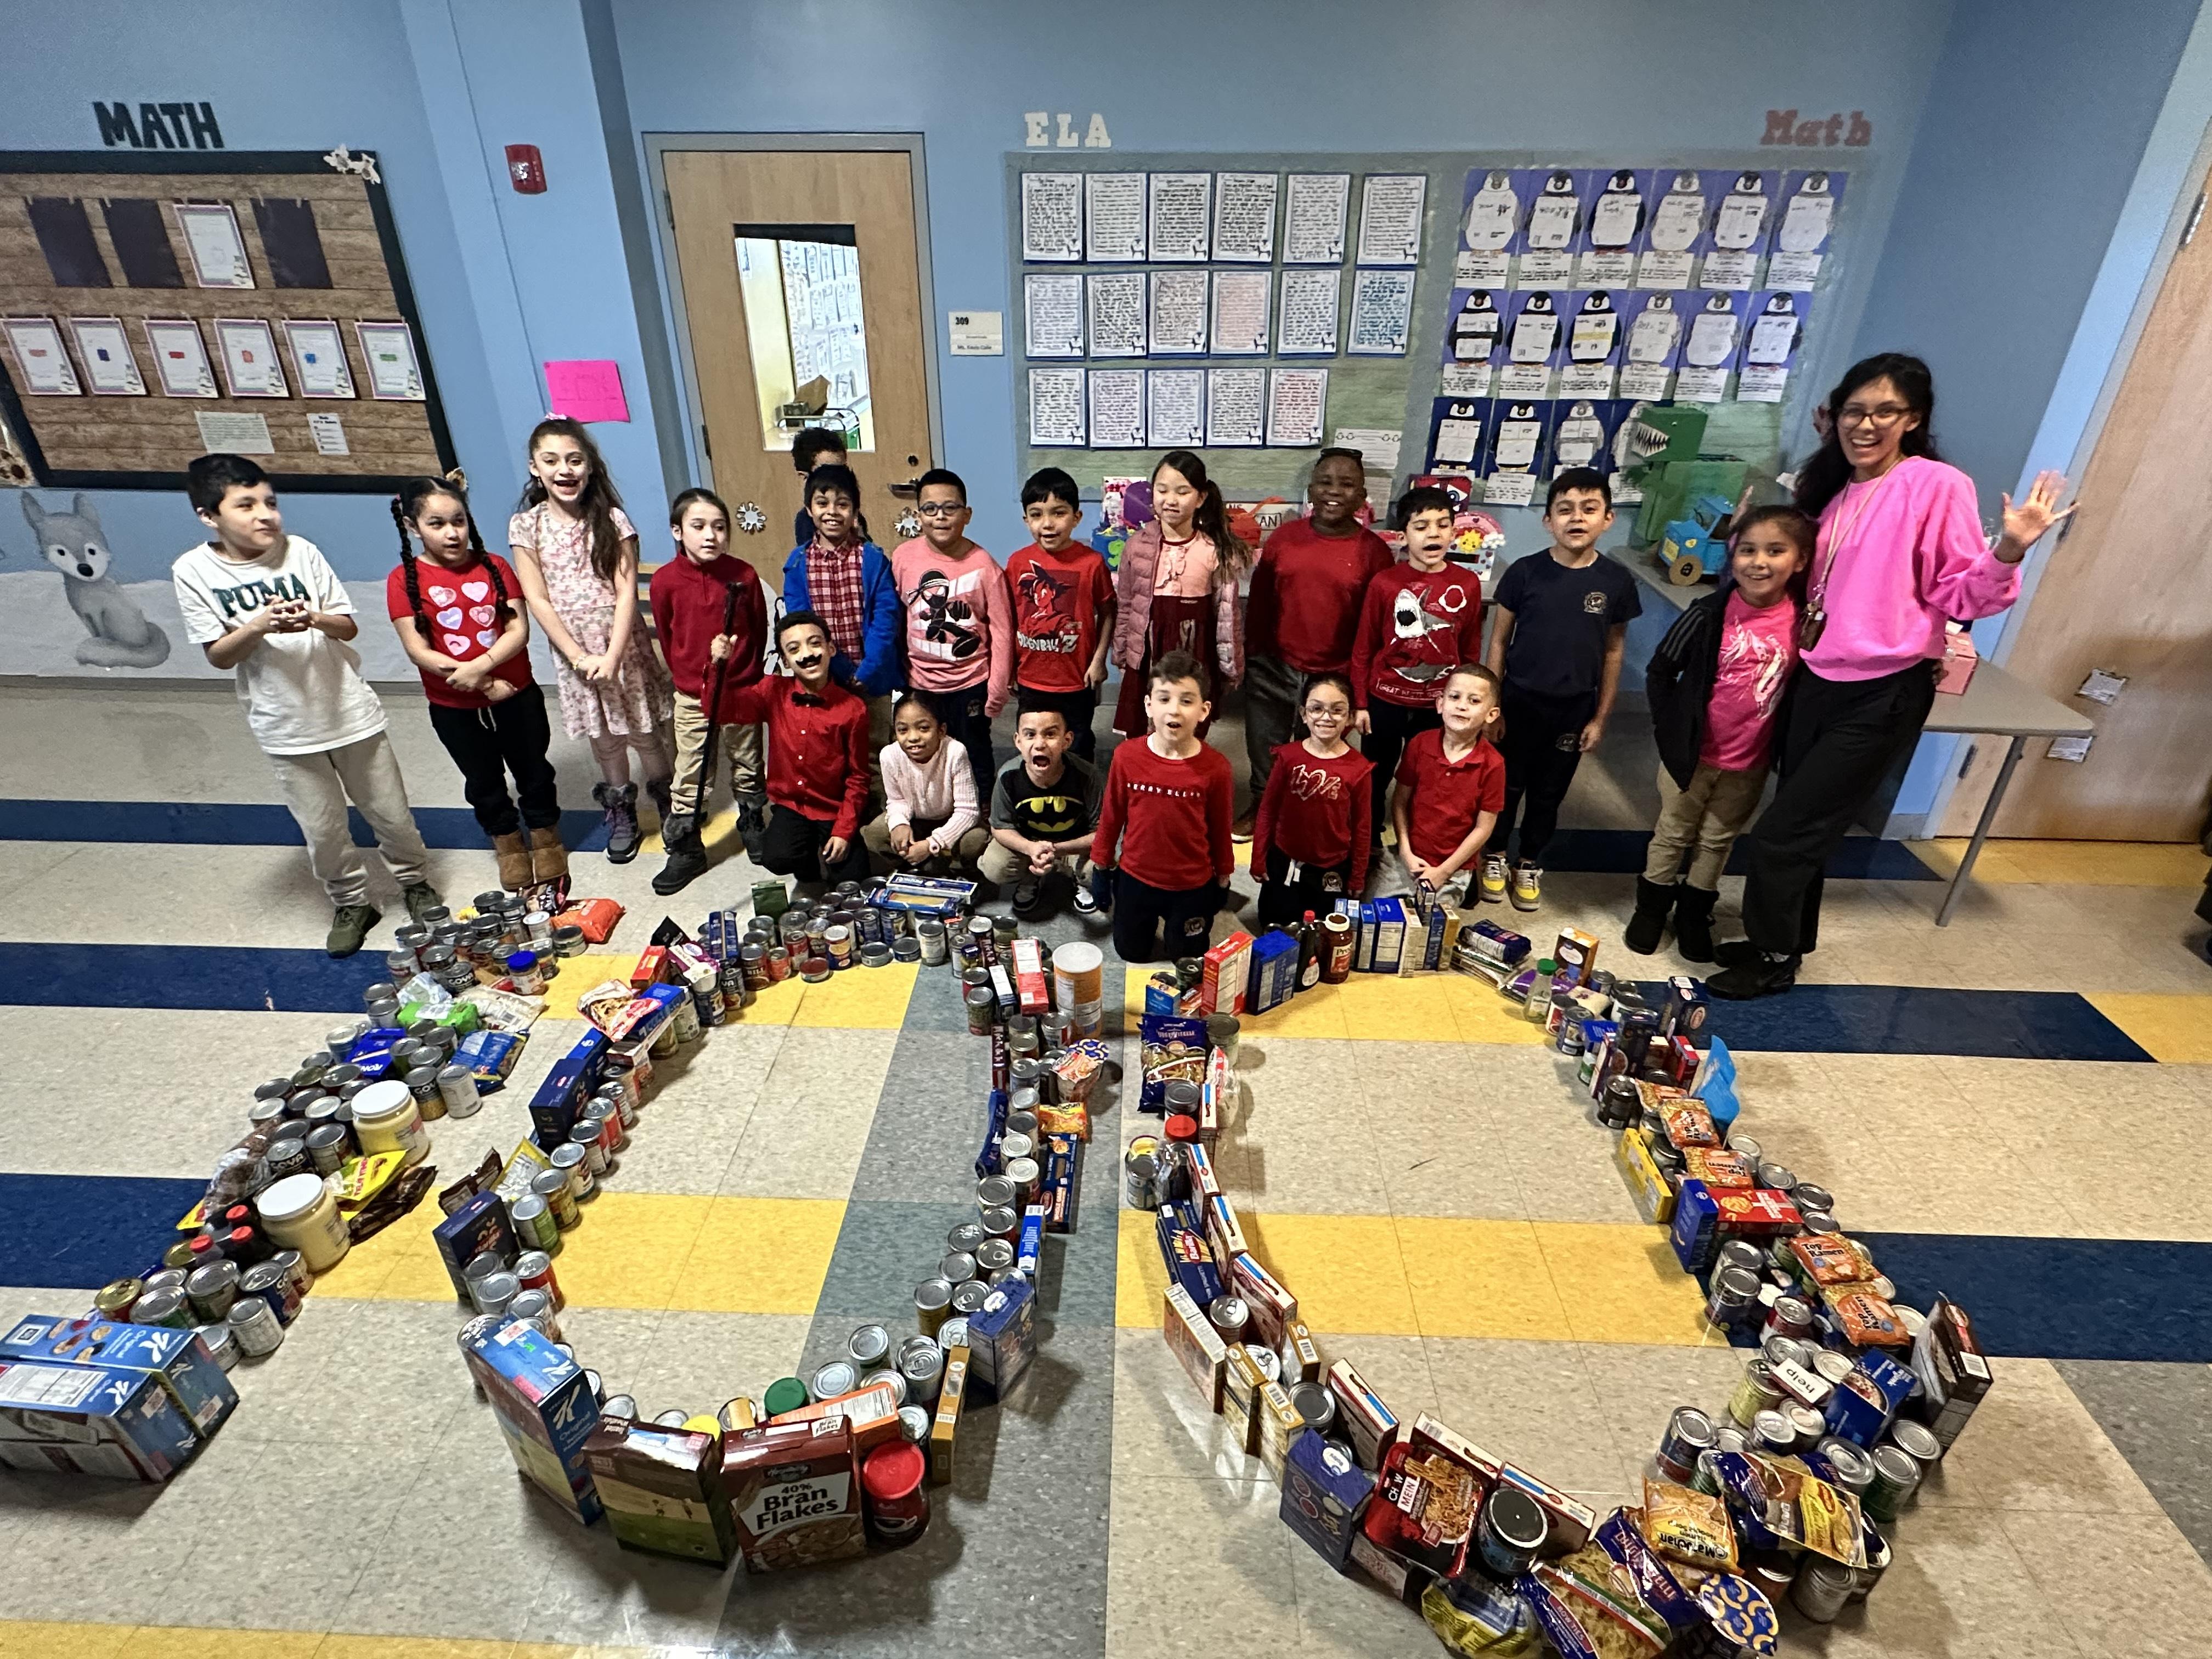 100 Days of Giving at the Hudson School